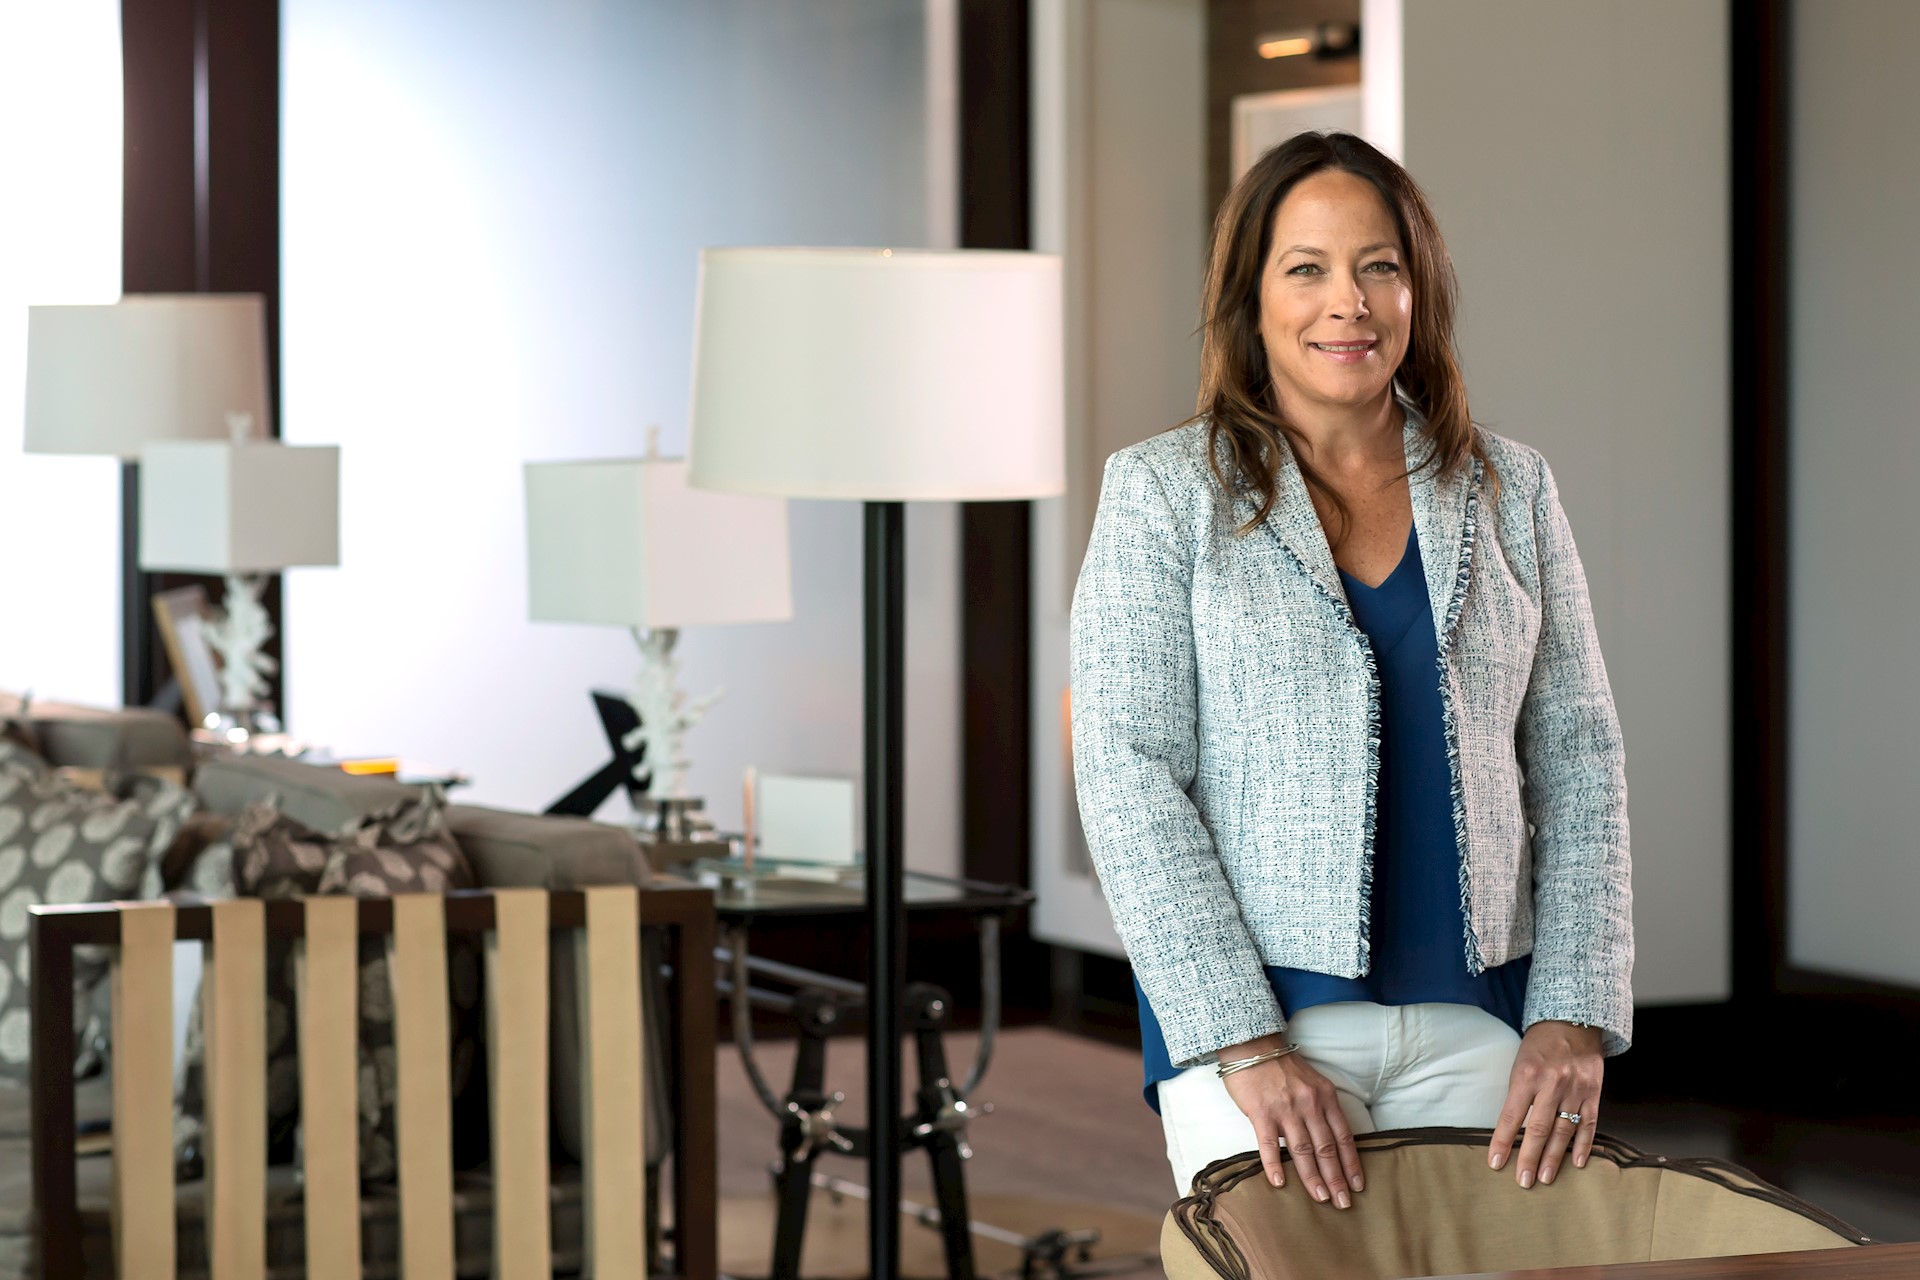 Unique Homes: Q&A with Dart Real Estate President Jackie Doak